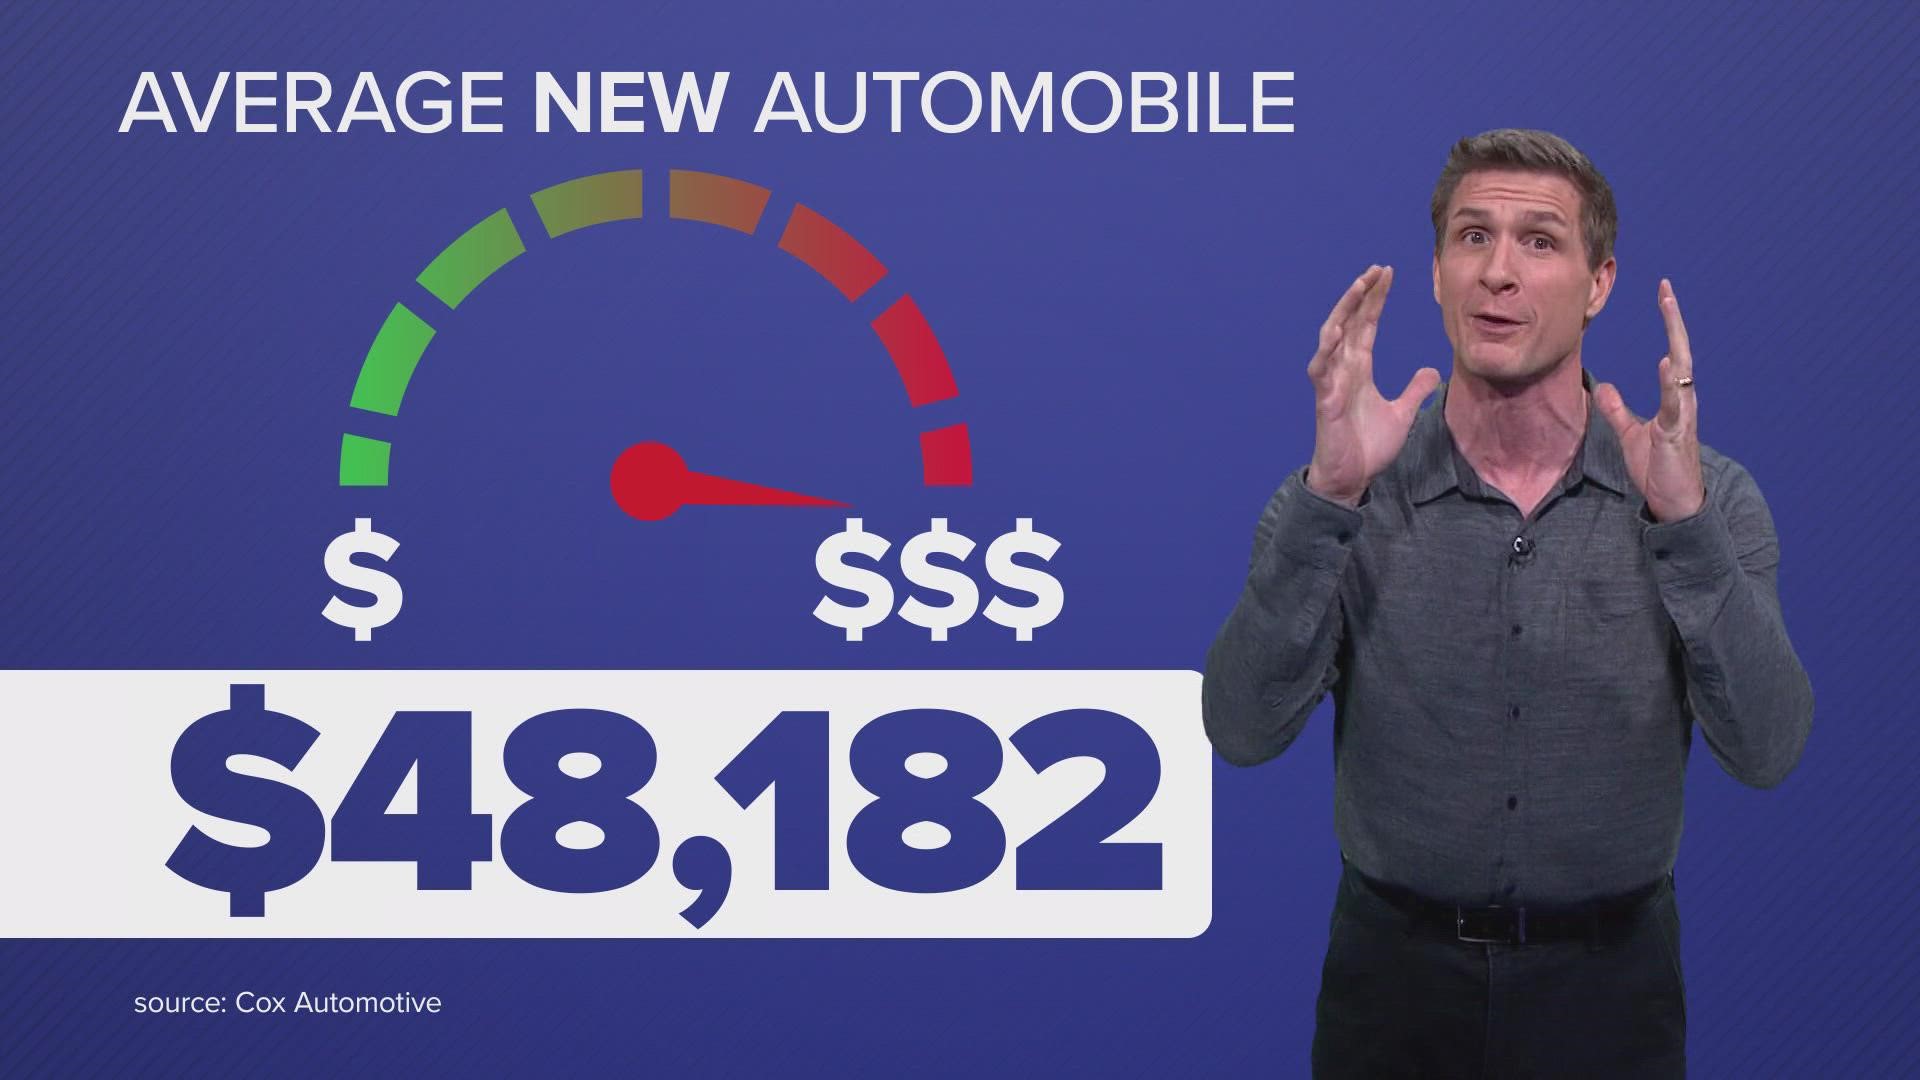 According to Cox Automotive, the average automobile transaction price just set another record, climbing to $48,182.